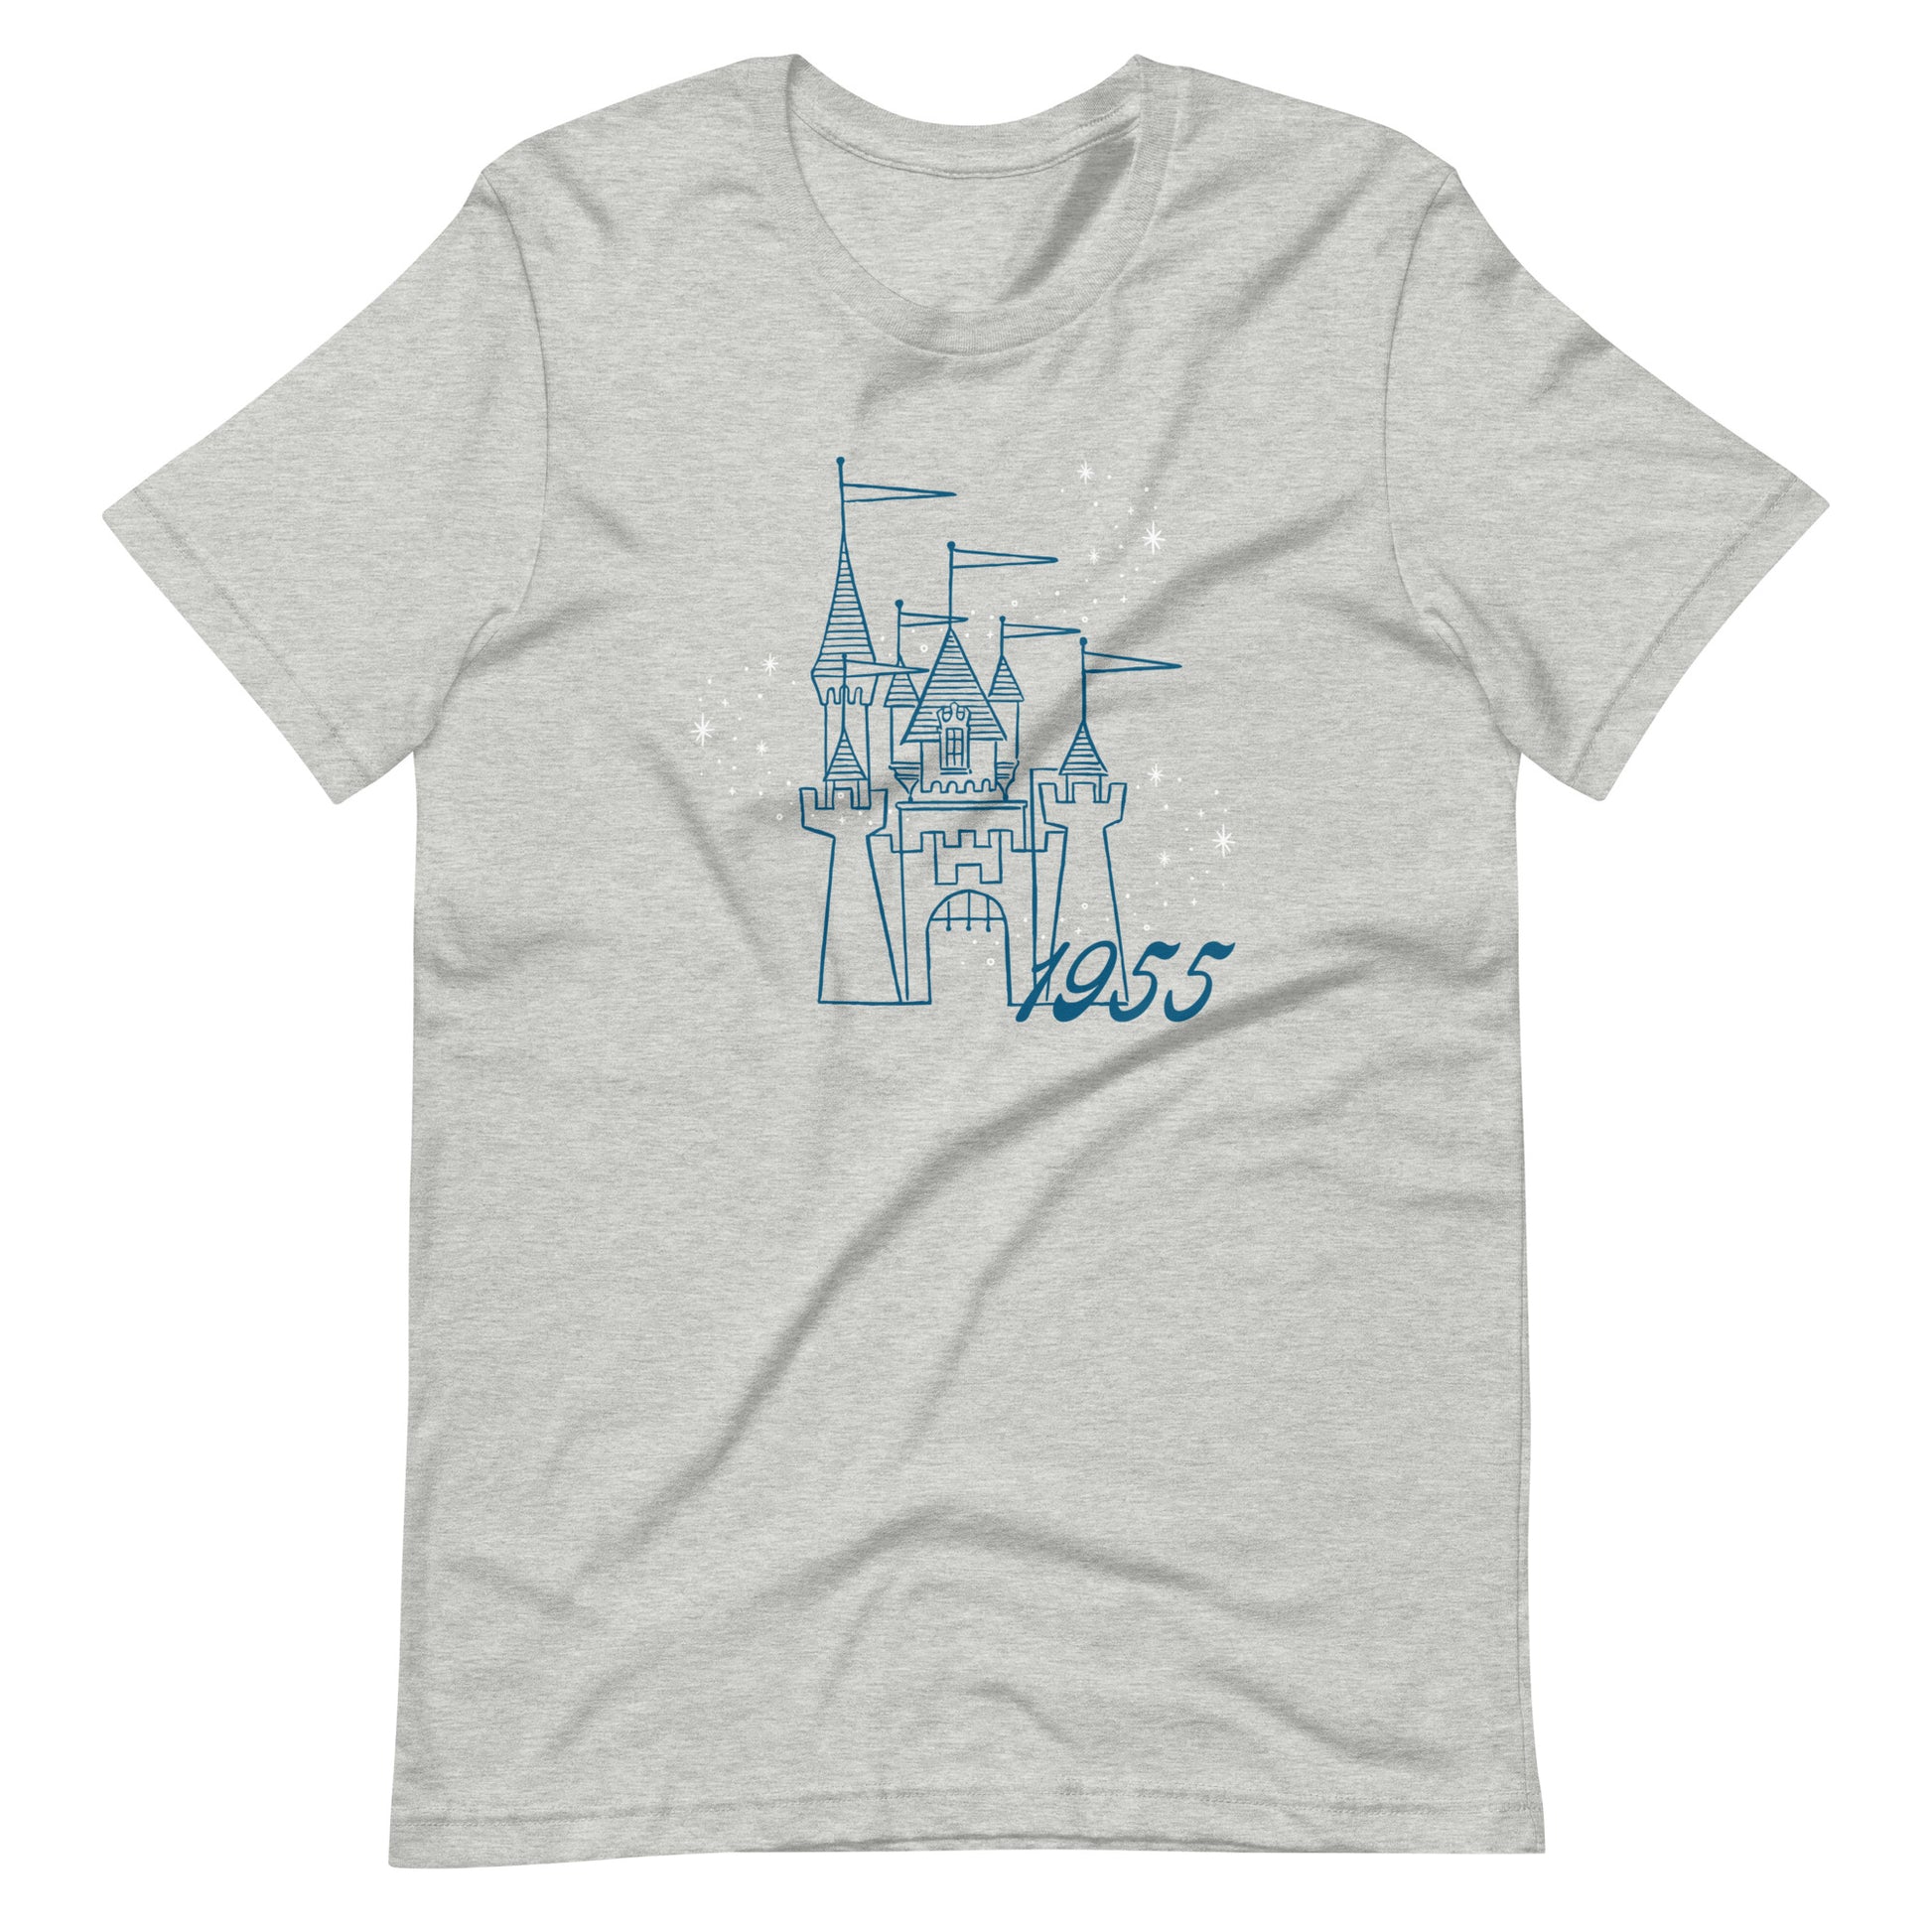 Gray t-shirt printed with vintage style sketch of a castle with the year 1955 and pixie dust above the castle.